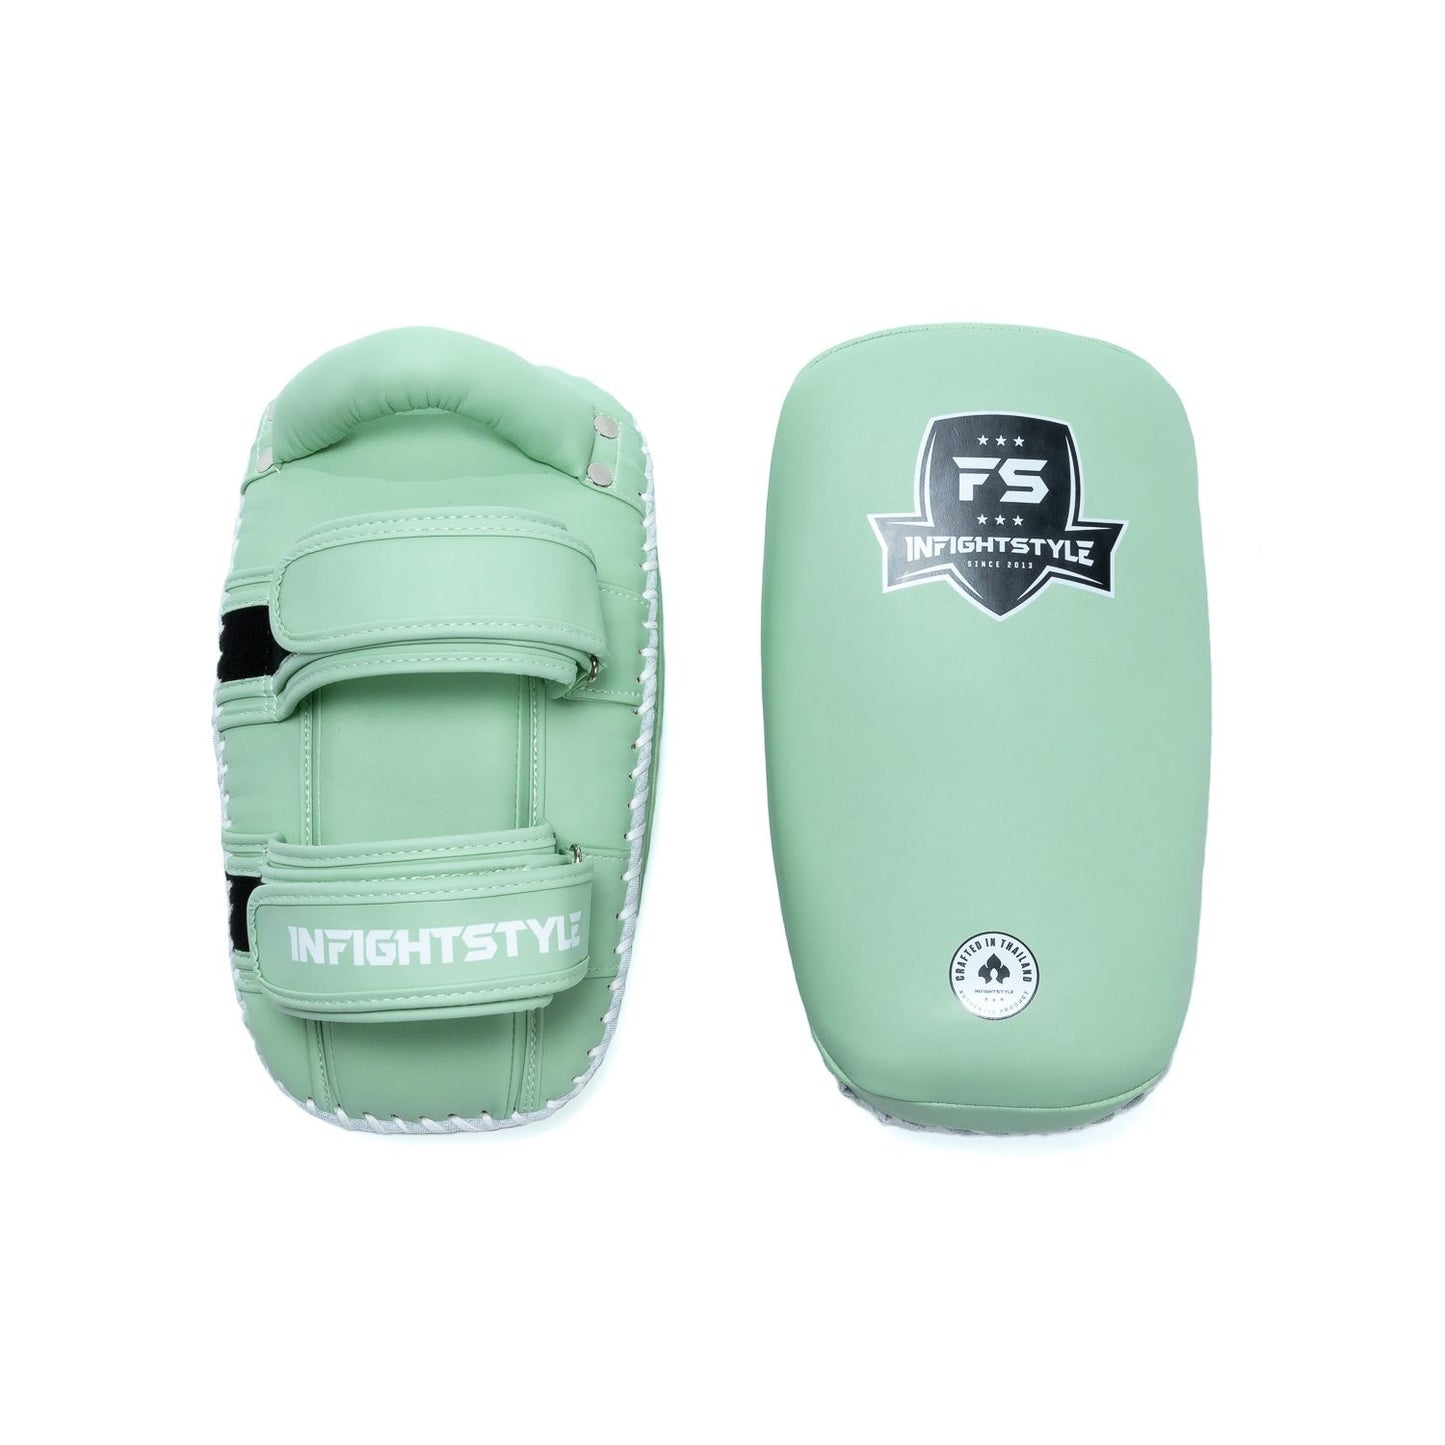 INFIGHTSTYLE KICK PADS SEMI LEATHER DOUBLE-STRAP